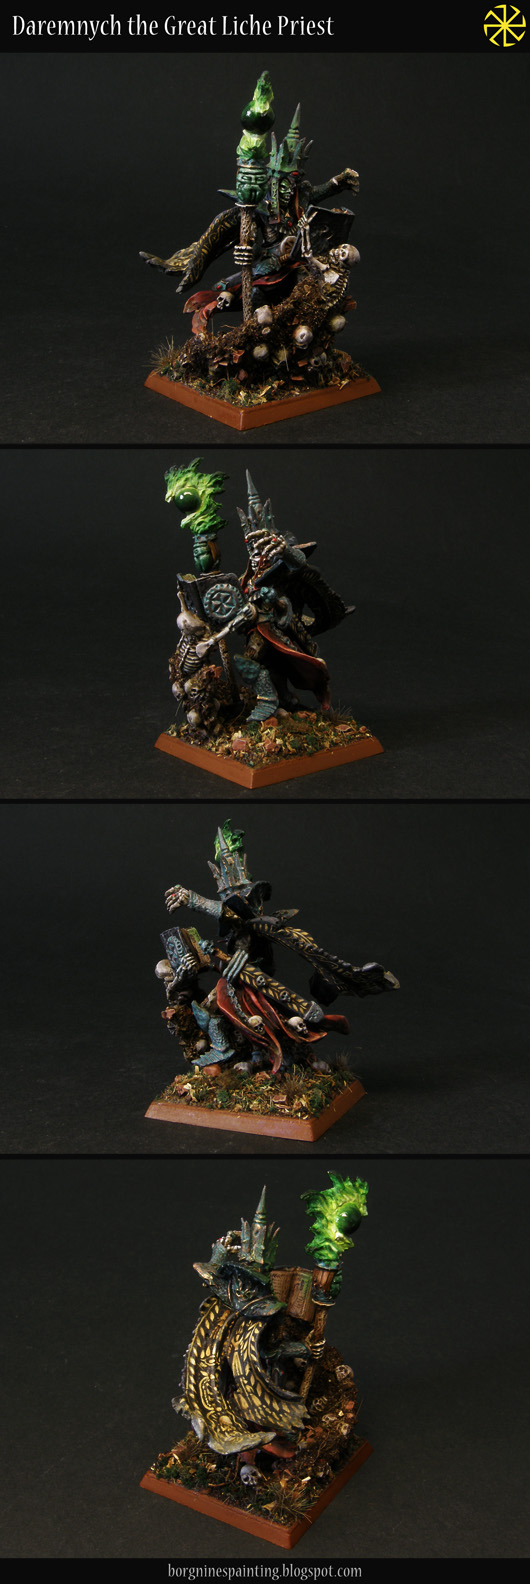 A single Necromancer Lord miniature from Avatars of War, sculpted by Gary Morley, on a square base, painted and converted to be used as powerful Liche character in WFB or AoS. He is carrying a flaming staff (some OSL effects there) and wearing a patinated crown.